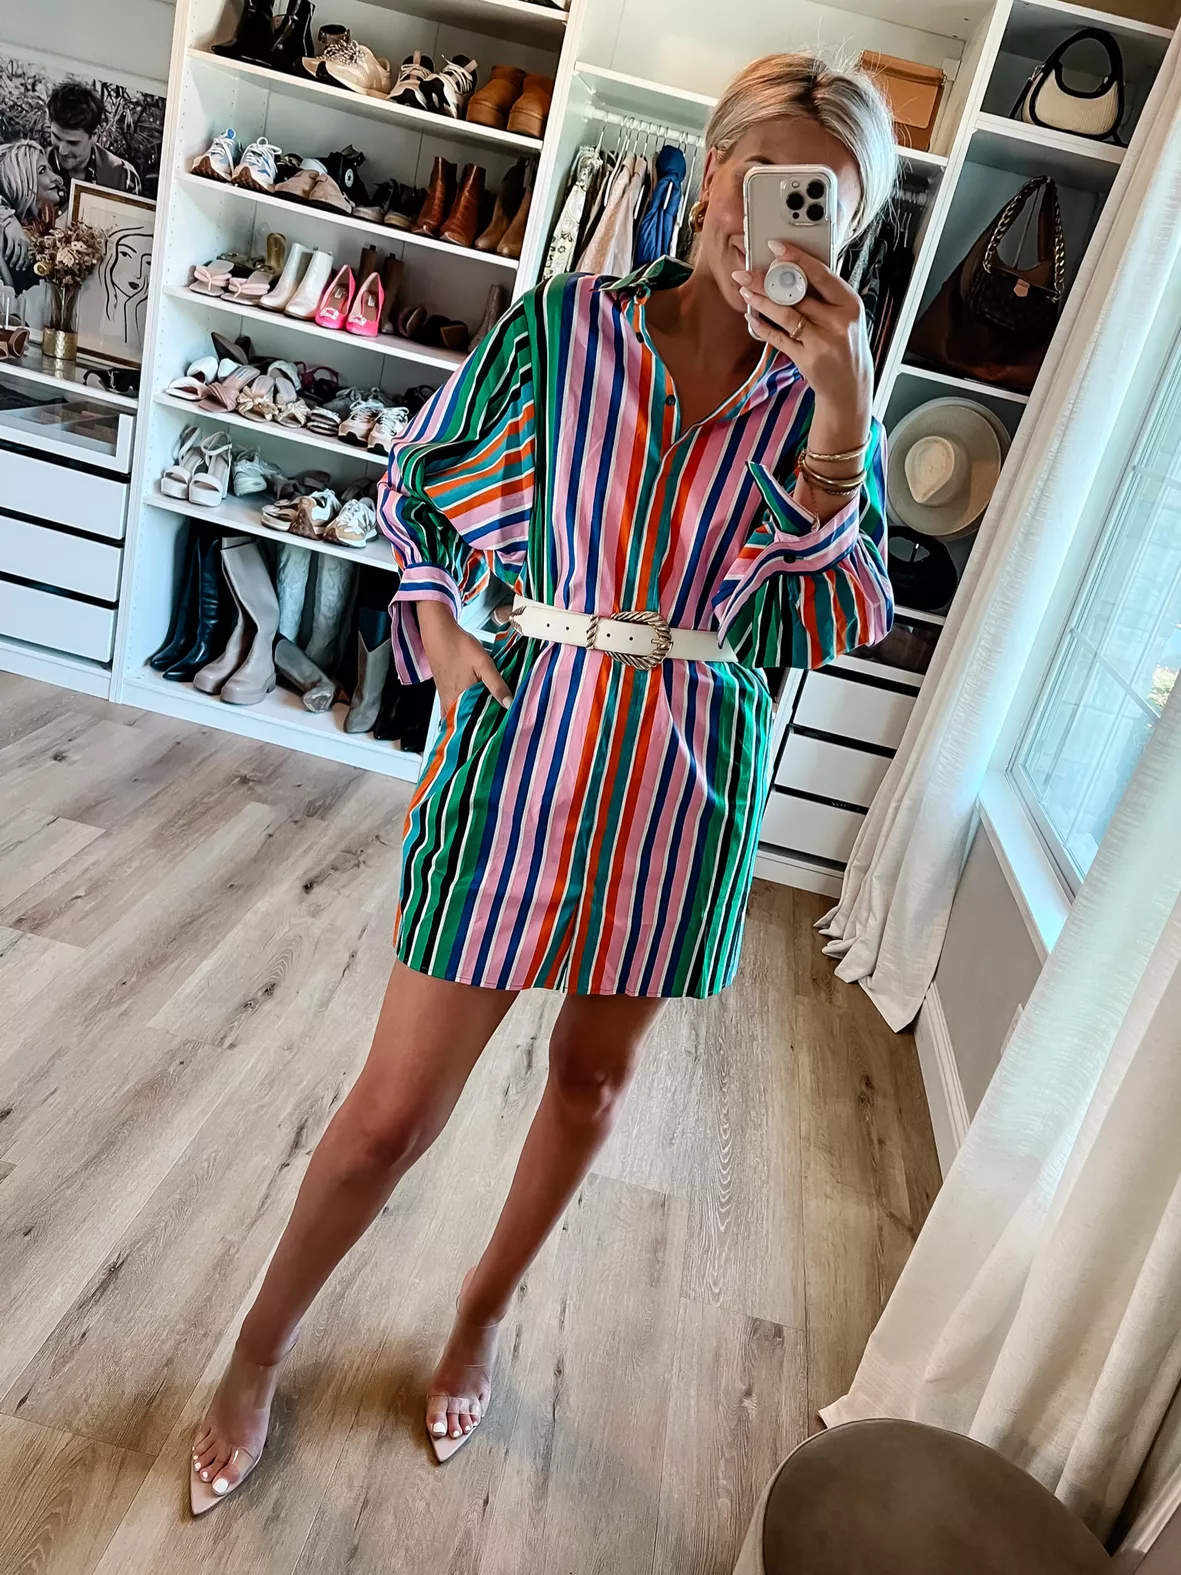 Belted Mini Shirtdress curated on LTK